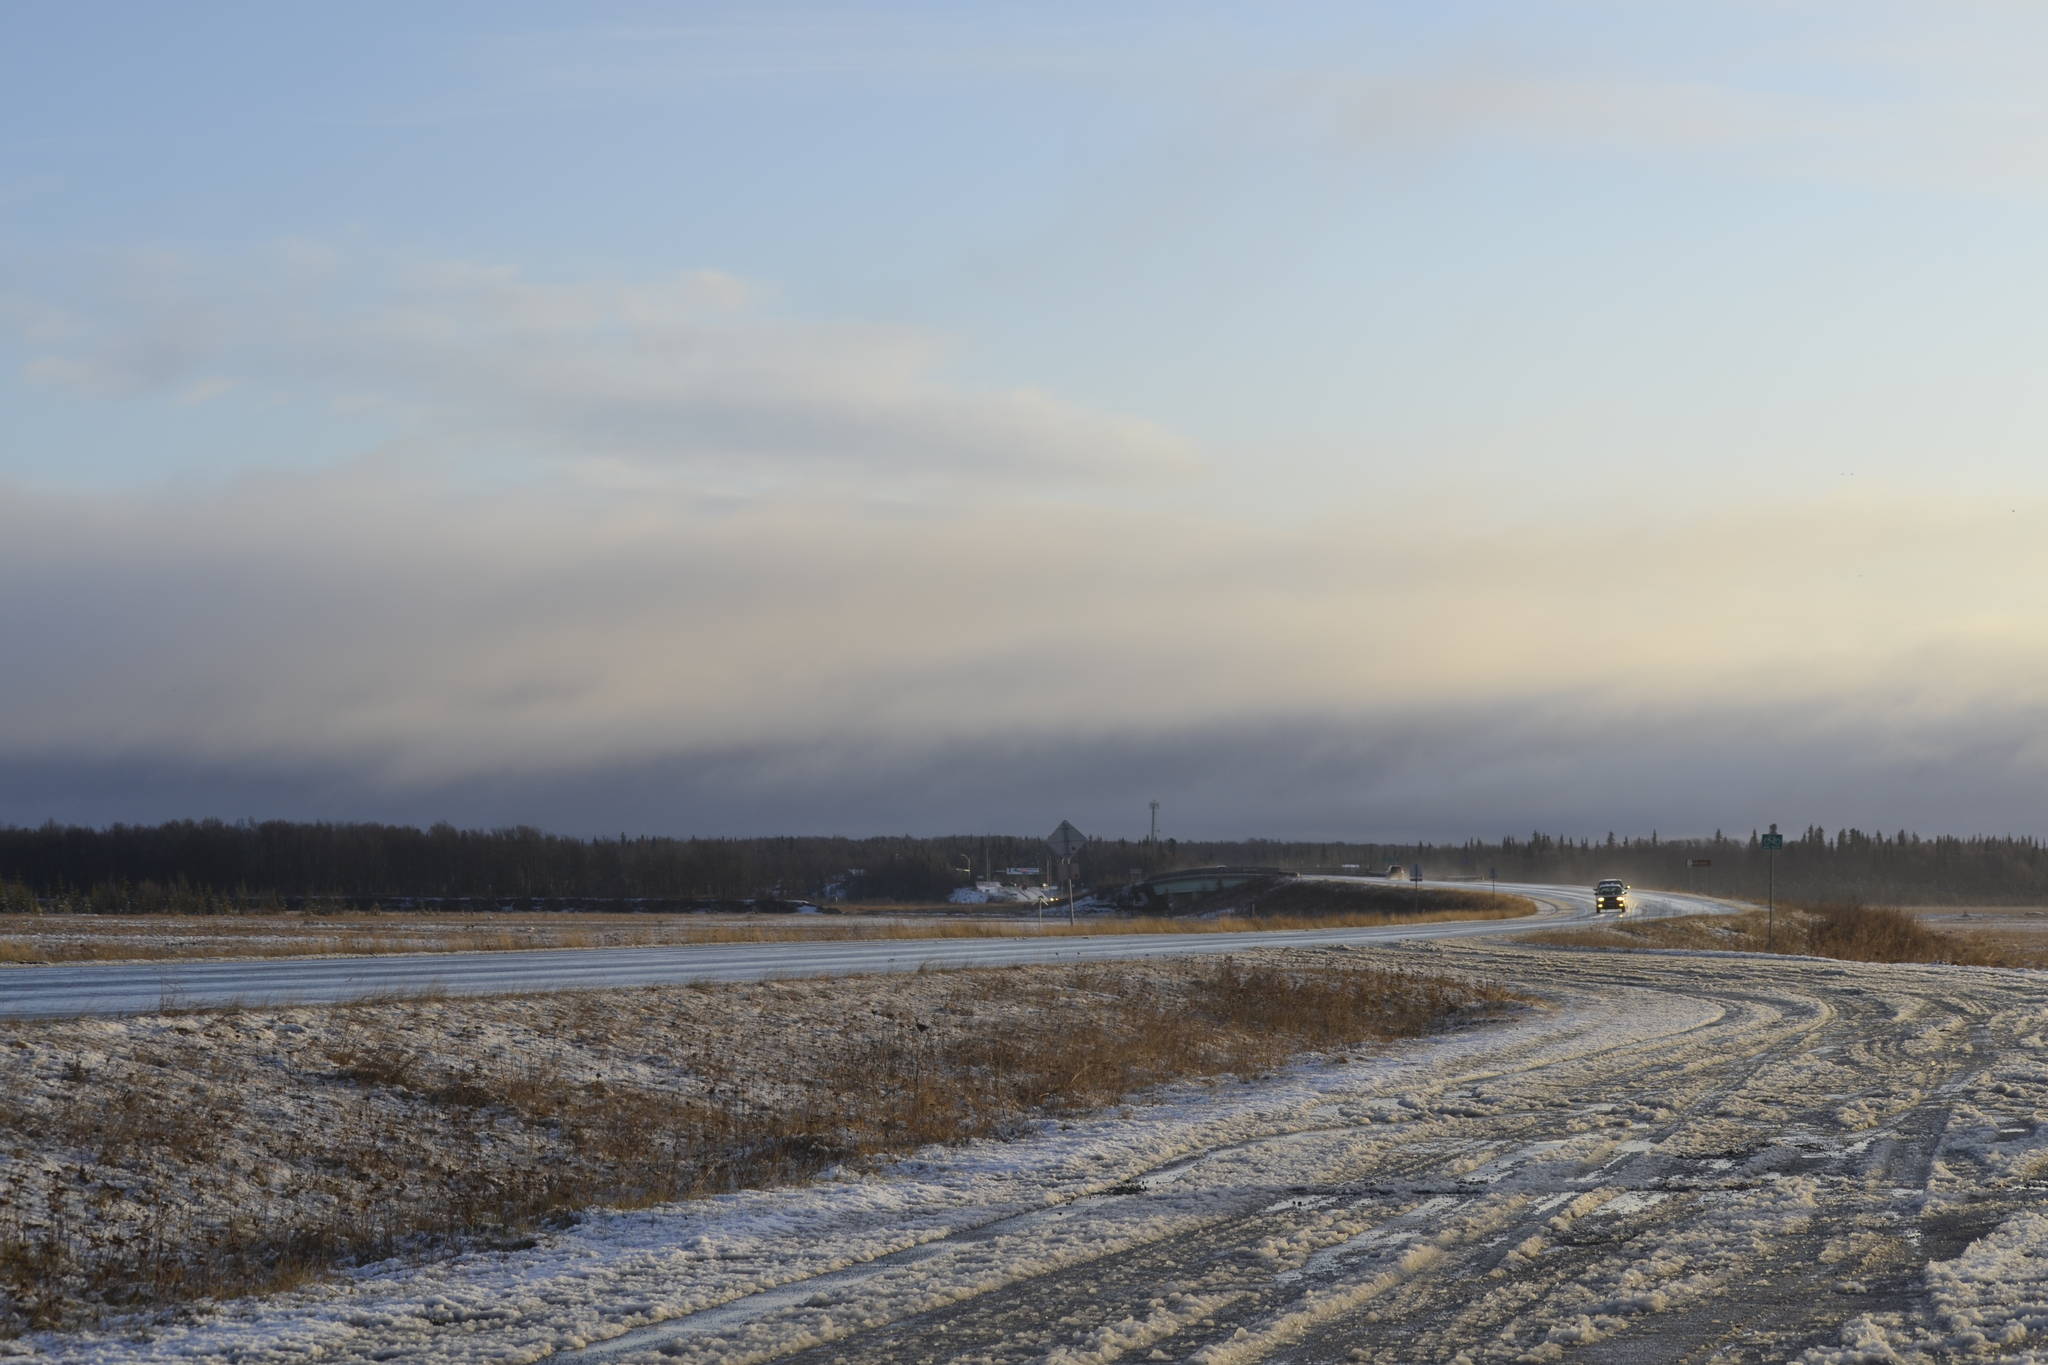 Bridge Access Road was wet and snowless by Thursday afternoon after being covered in snow from an early morning snowfall, on Thursday, Nov. 14, 2019, in Kenai, Alaska. (Photo by Victoria Petersen/Peninsula Clarion)